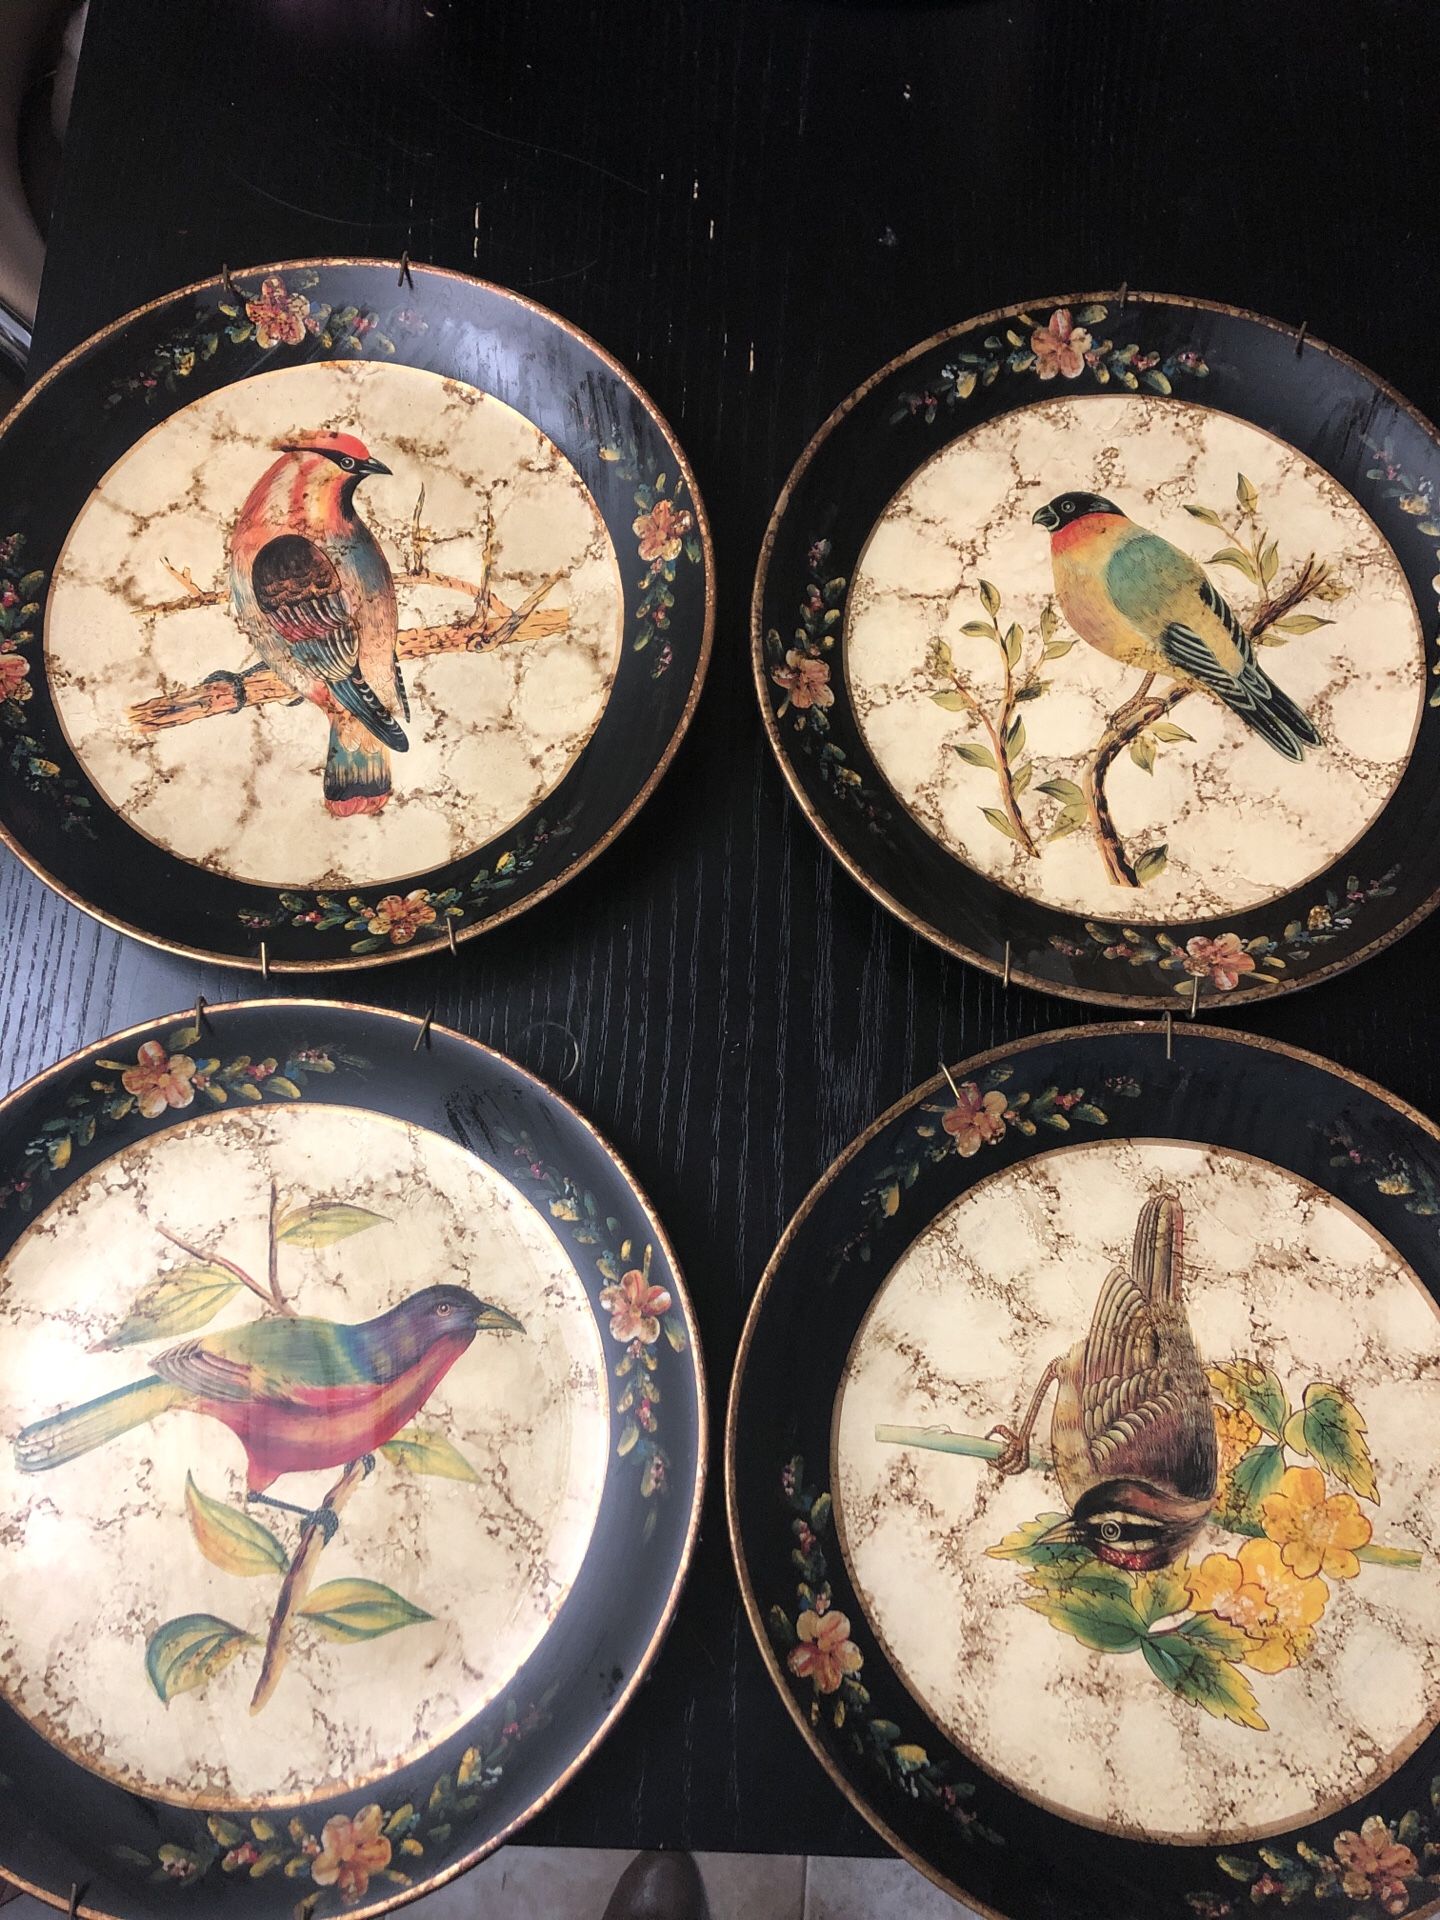 Decorative hanging plates for kitchen or dining room